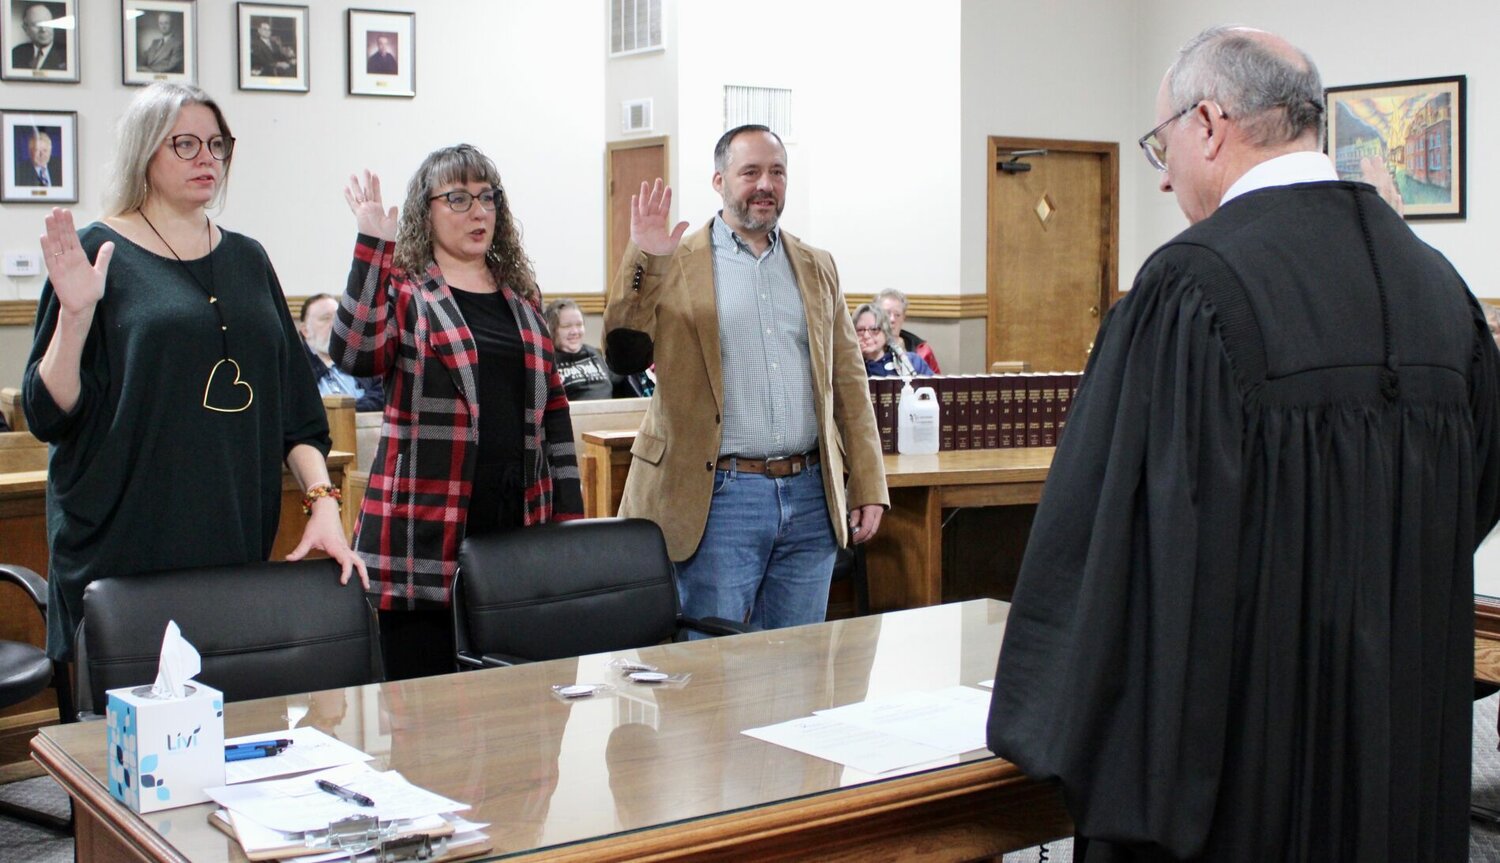 The 37th Judicial Court Appointed Special Advocates (CASA) has sworn in three new board members. Taking their oaths are, from left, Lynette Reid, Maggie Fielder and Marcus Allen, all of West Plains. Administering the oaths is Presiding 37th Judicial Circuit Judge Steven Privettes. Reid is board treasurer, Fielder is chair of fundraising and Allen is chair of personnel. CASA is a nonprofit organization that trains volunteers to advocate for children that have placed in state care due to abuse or neglect during legal proceedings to determine long term placement, with a focus on the well-being of the child. To become a CASA volunteer, call 417-255-2100 or for more information visit the CASA website at 37thcasa.net.